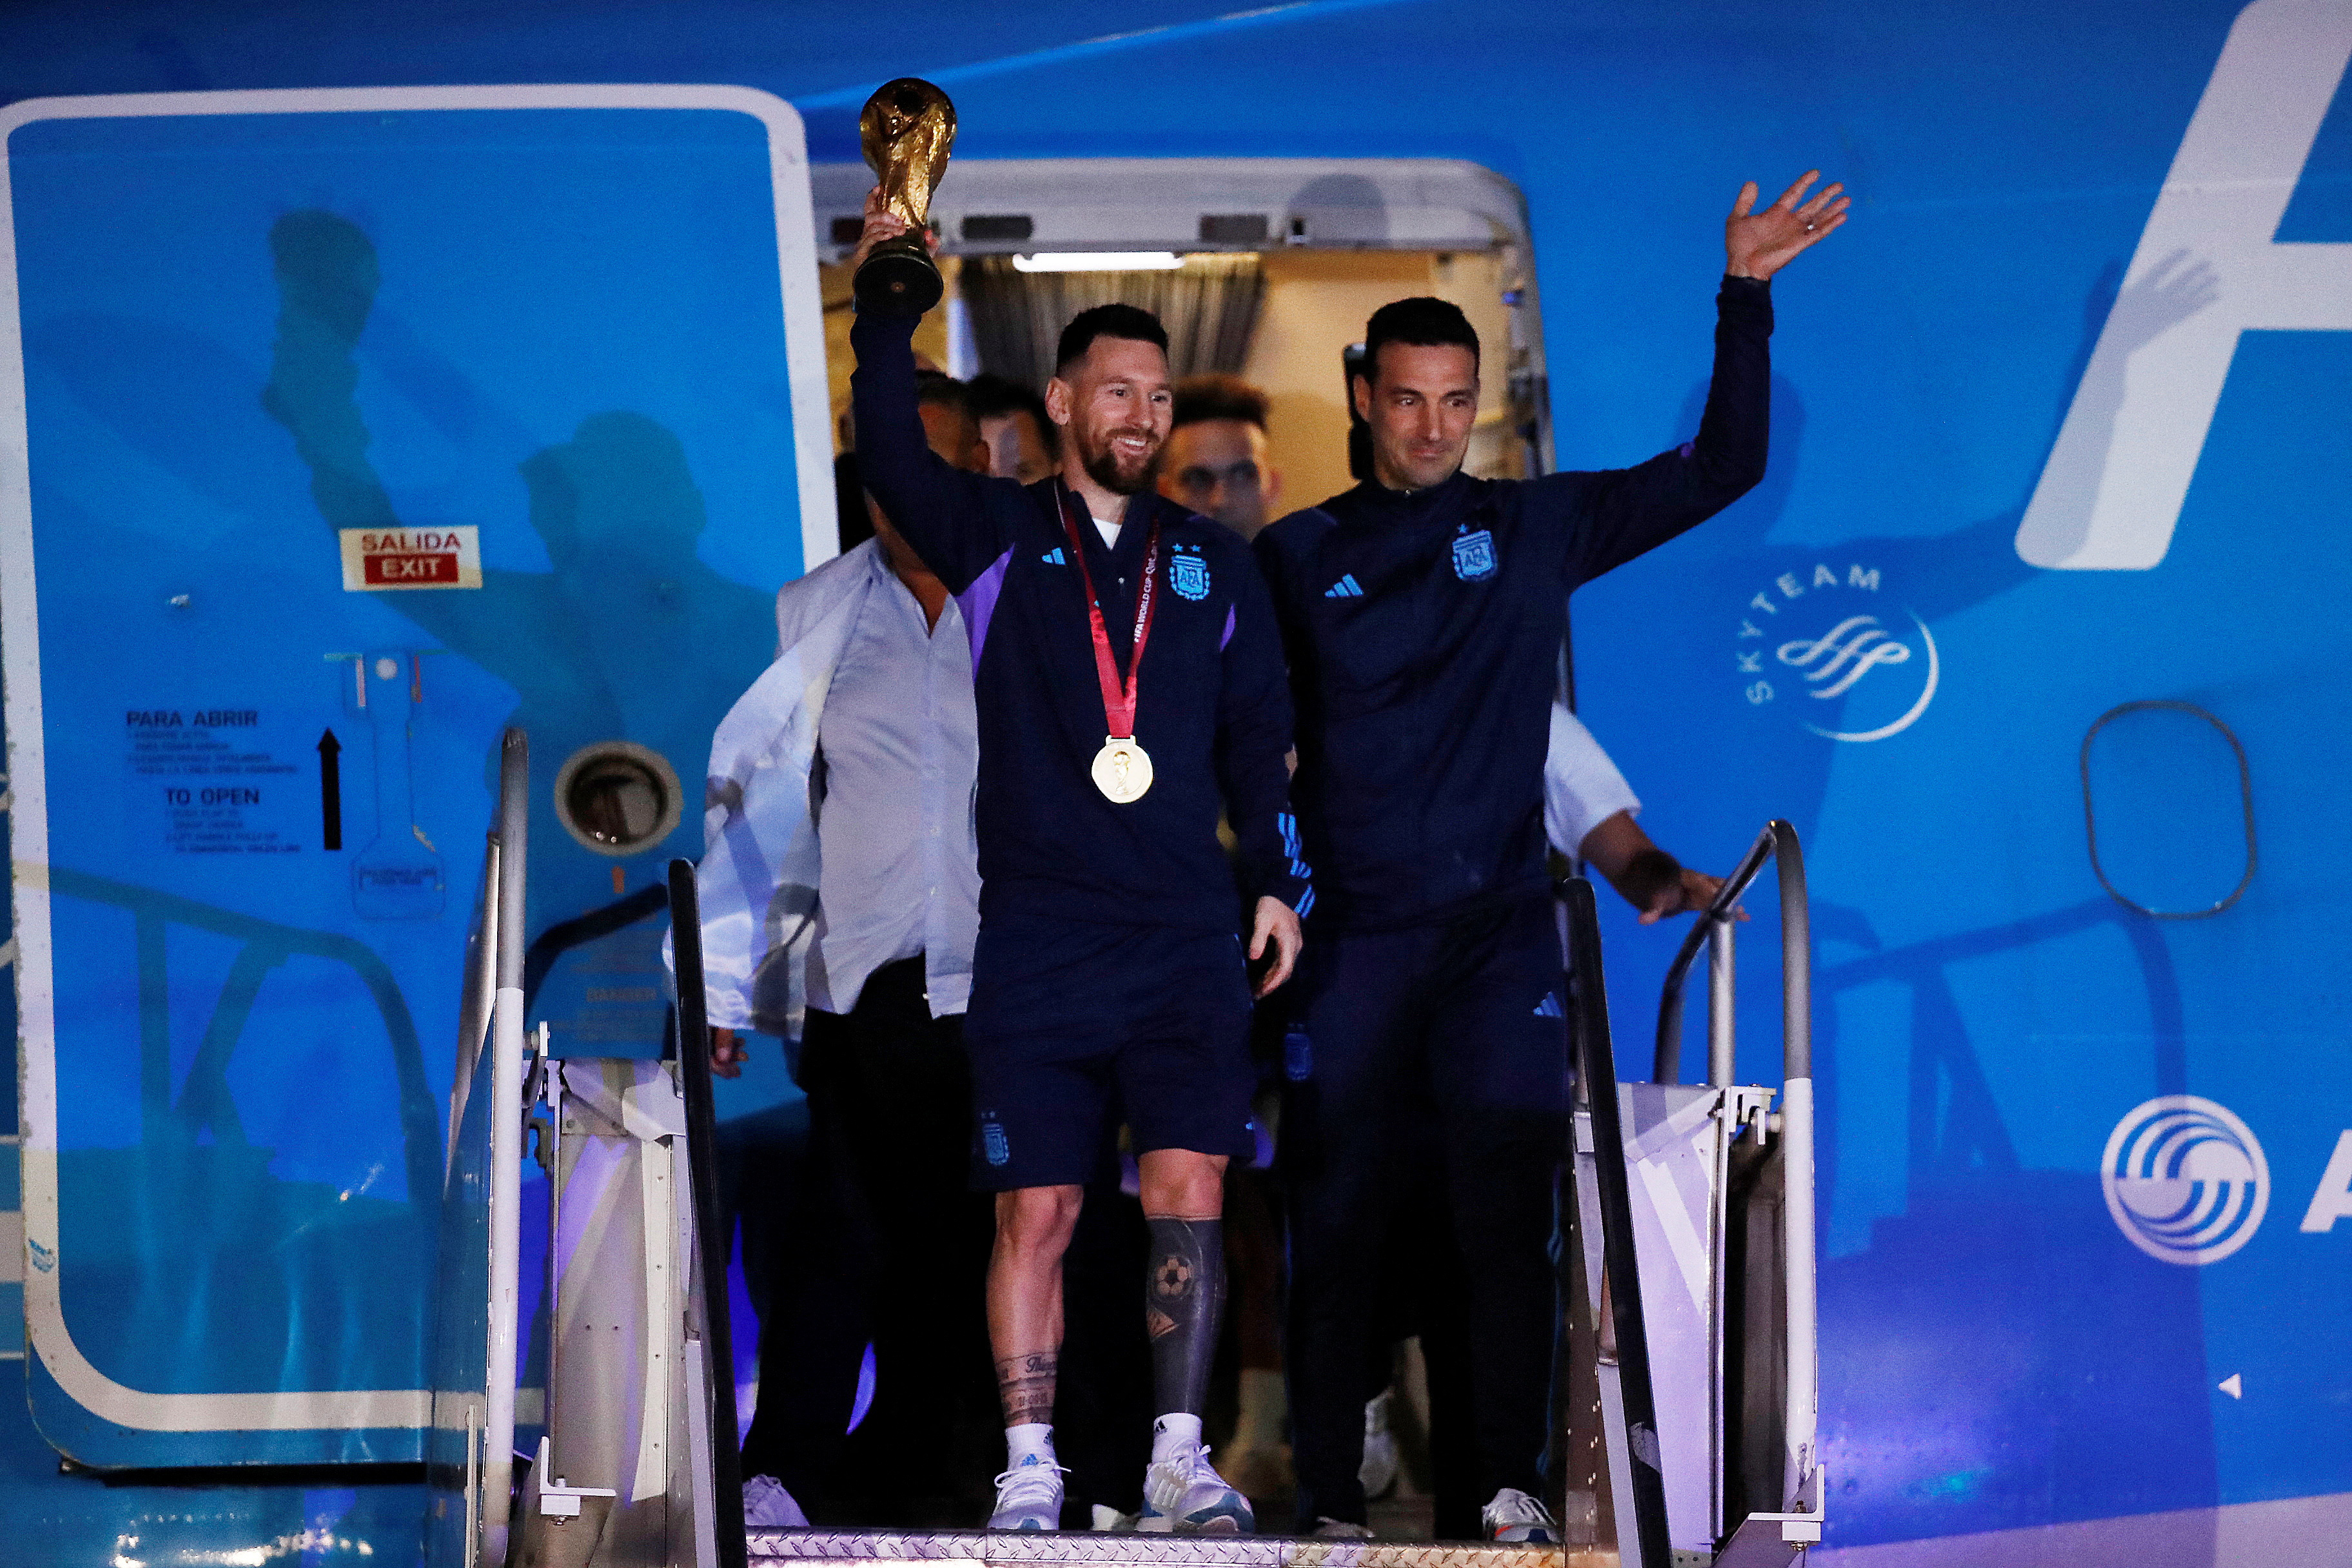 Argentina team arrived in Buenos Aires after winning the World Cup